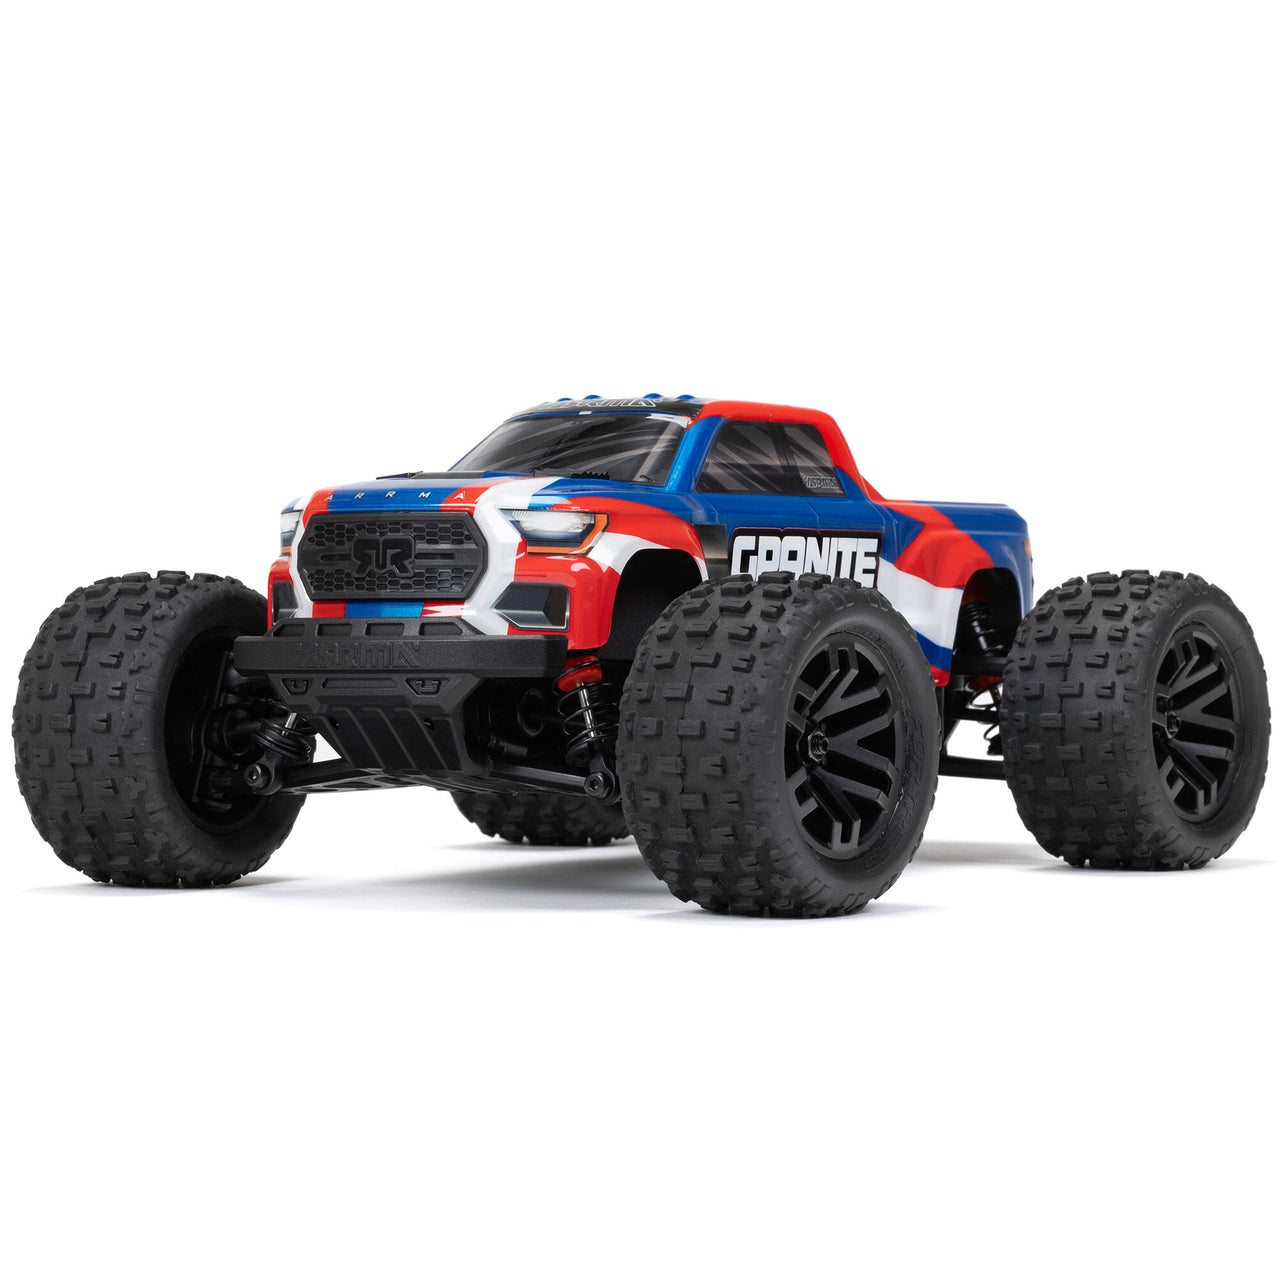 ARA2102T1 1/18 GRANITE GROM MEGA 380 Brushed 4X4 Monster Truck RTR with Battery & Charger, Blue (in store only)